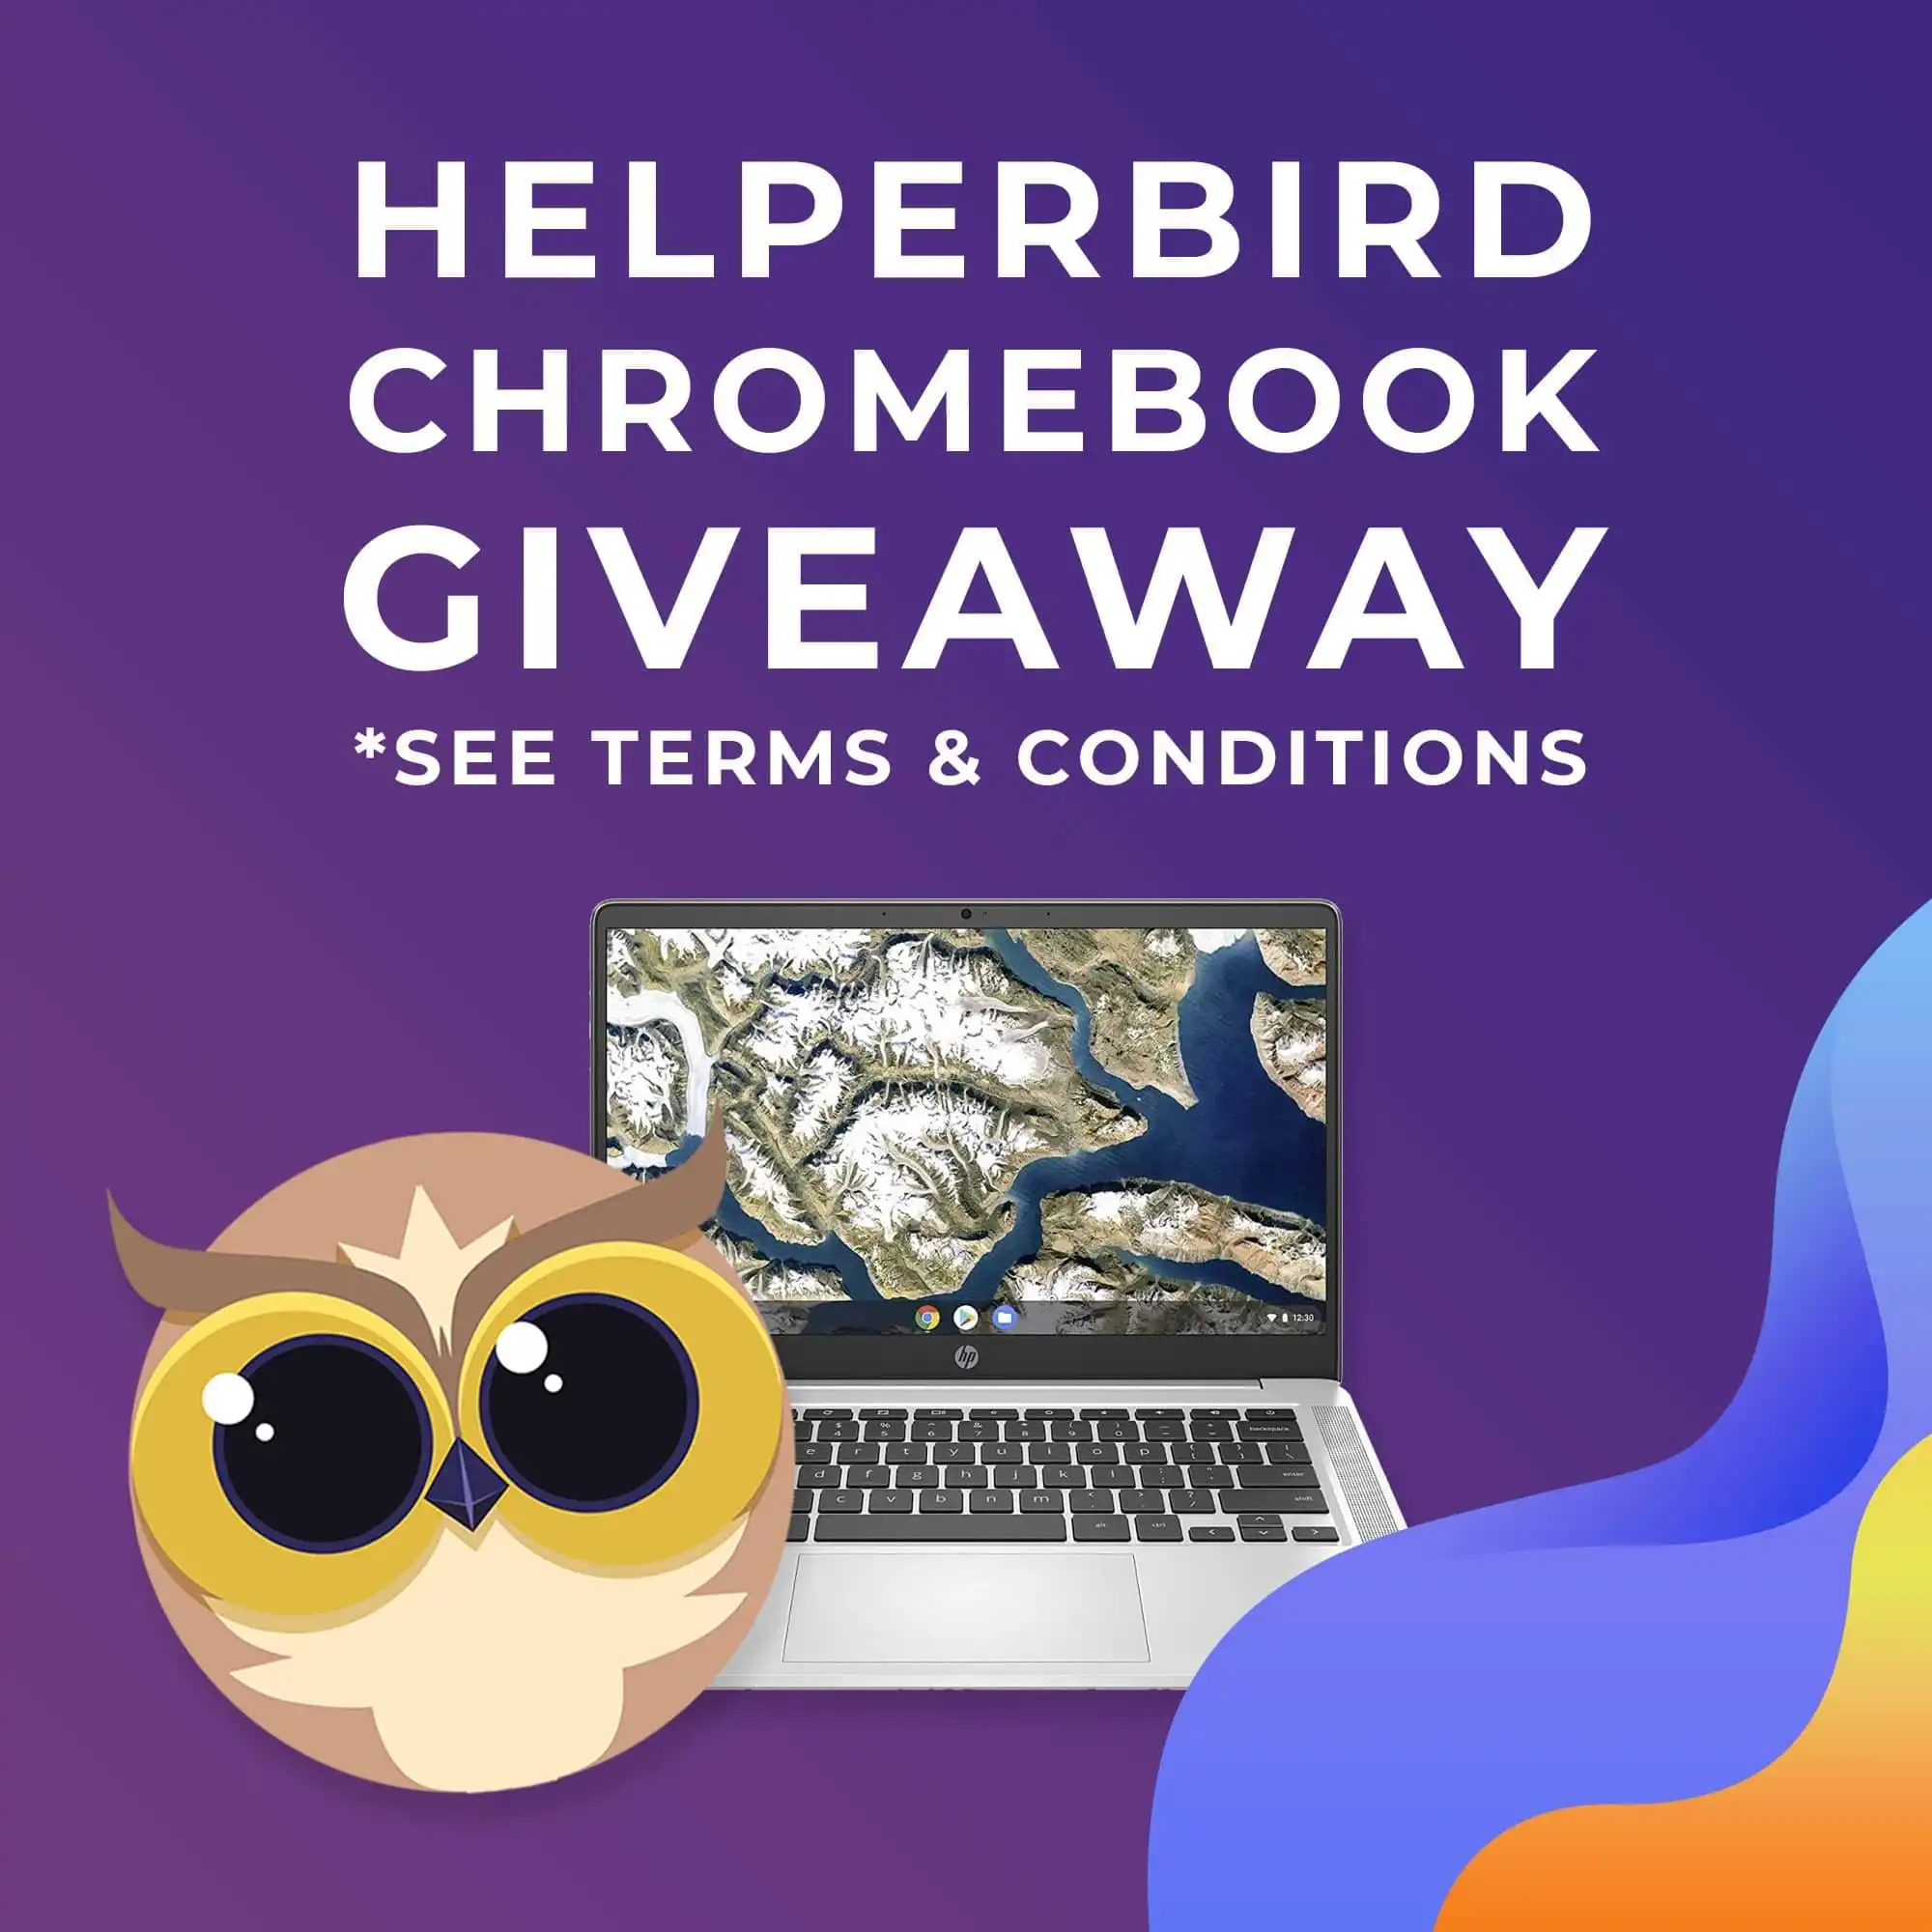 Rules for the Helperbird giveaway official rules